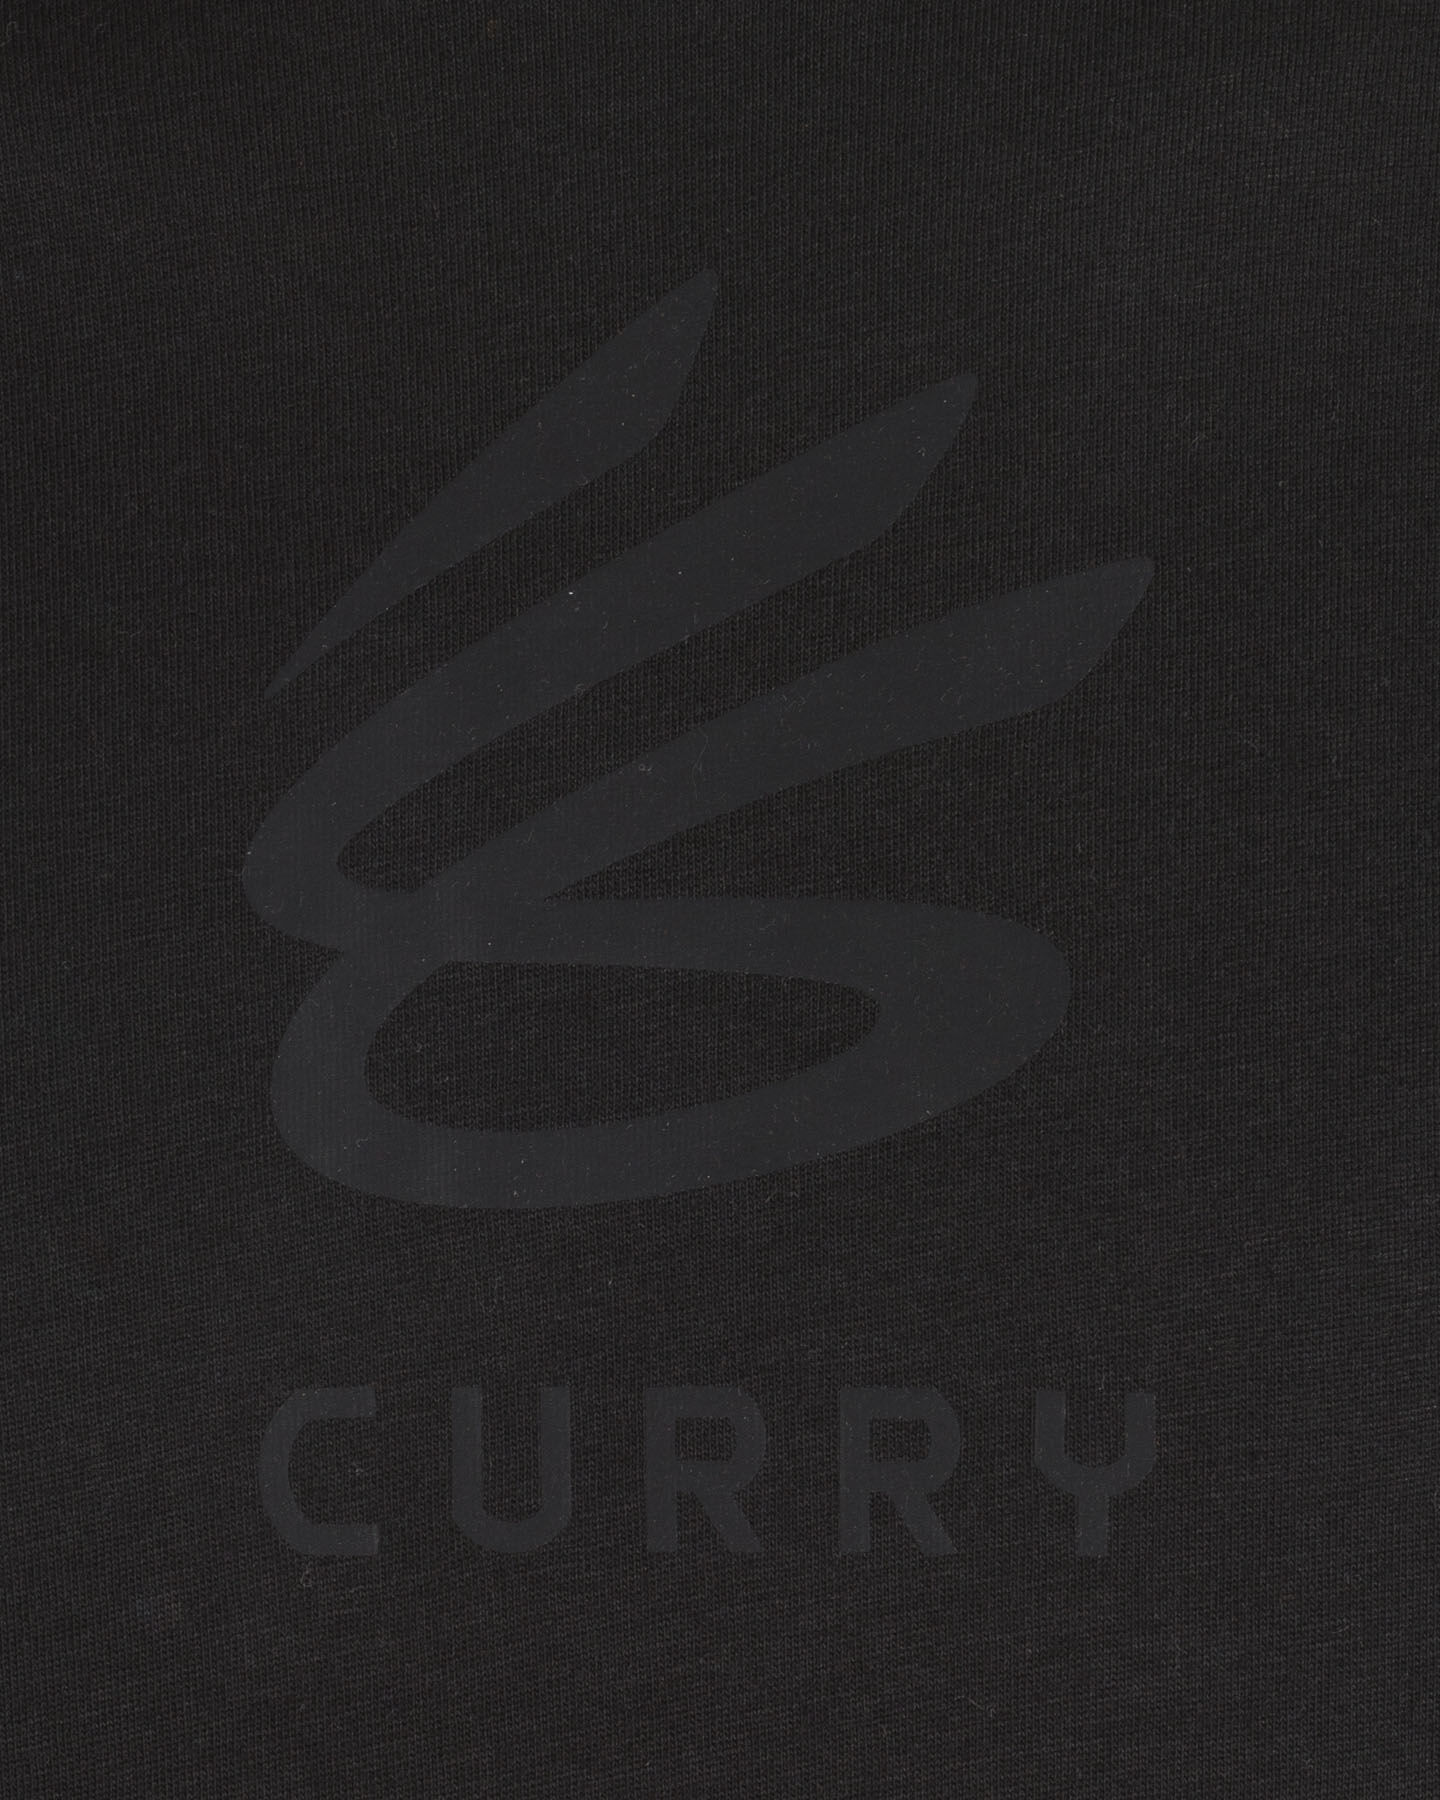  Maglia basket UNDER ARMOUR CURRY LOGO M S5229470|0001|SM scatto 2